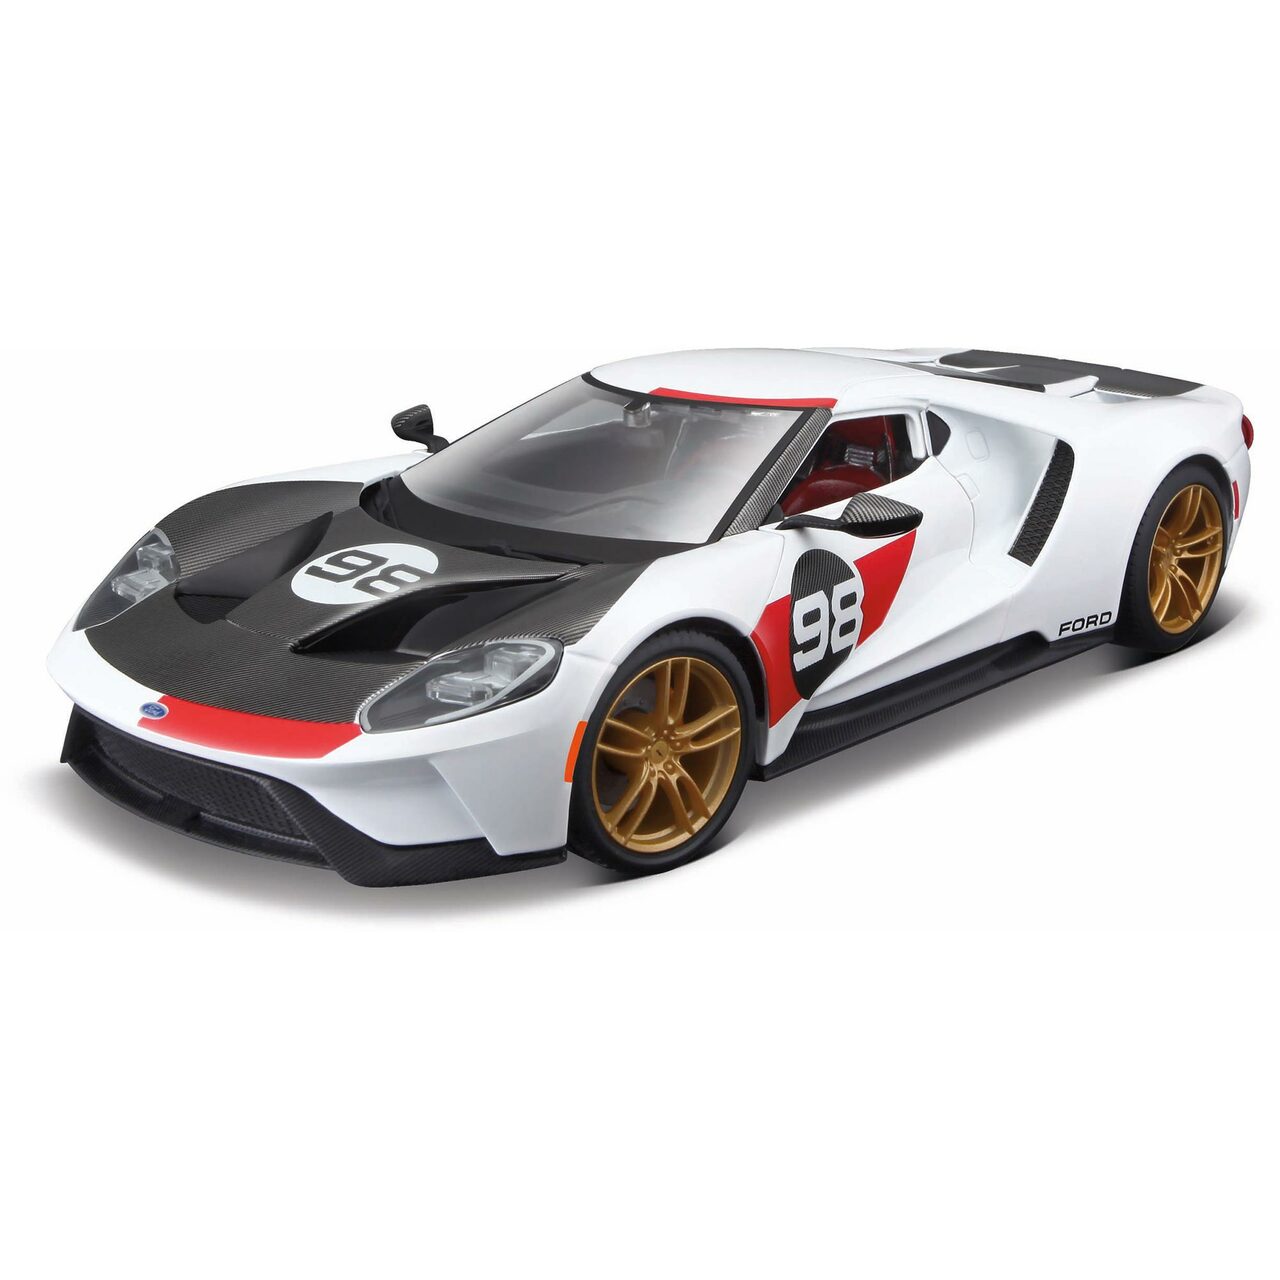 Игрушечная машинка Maisto Ford GT Heritage 2021, 1:18, белая 31390 maisto 1 18 harley davidson 1993 flstn heritage softail alloy diecast motorcycle model workable toy gifts toy collection